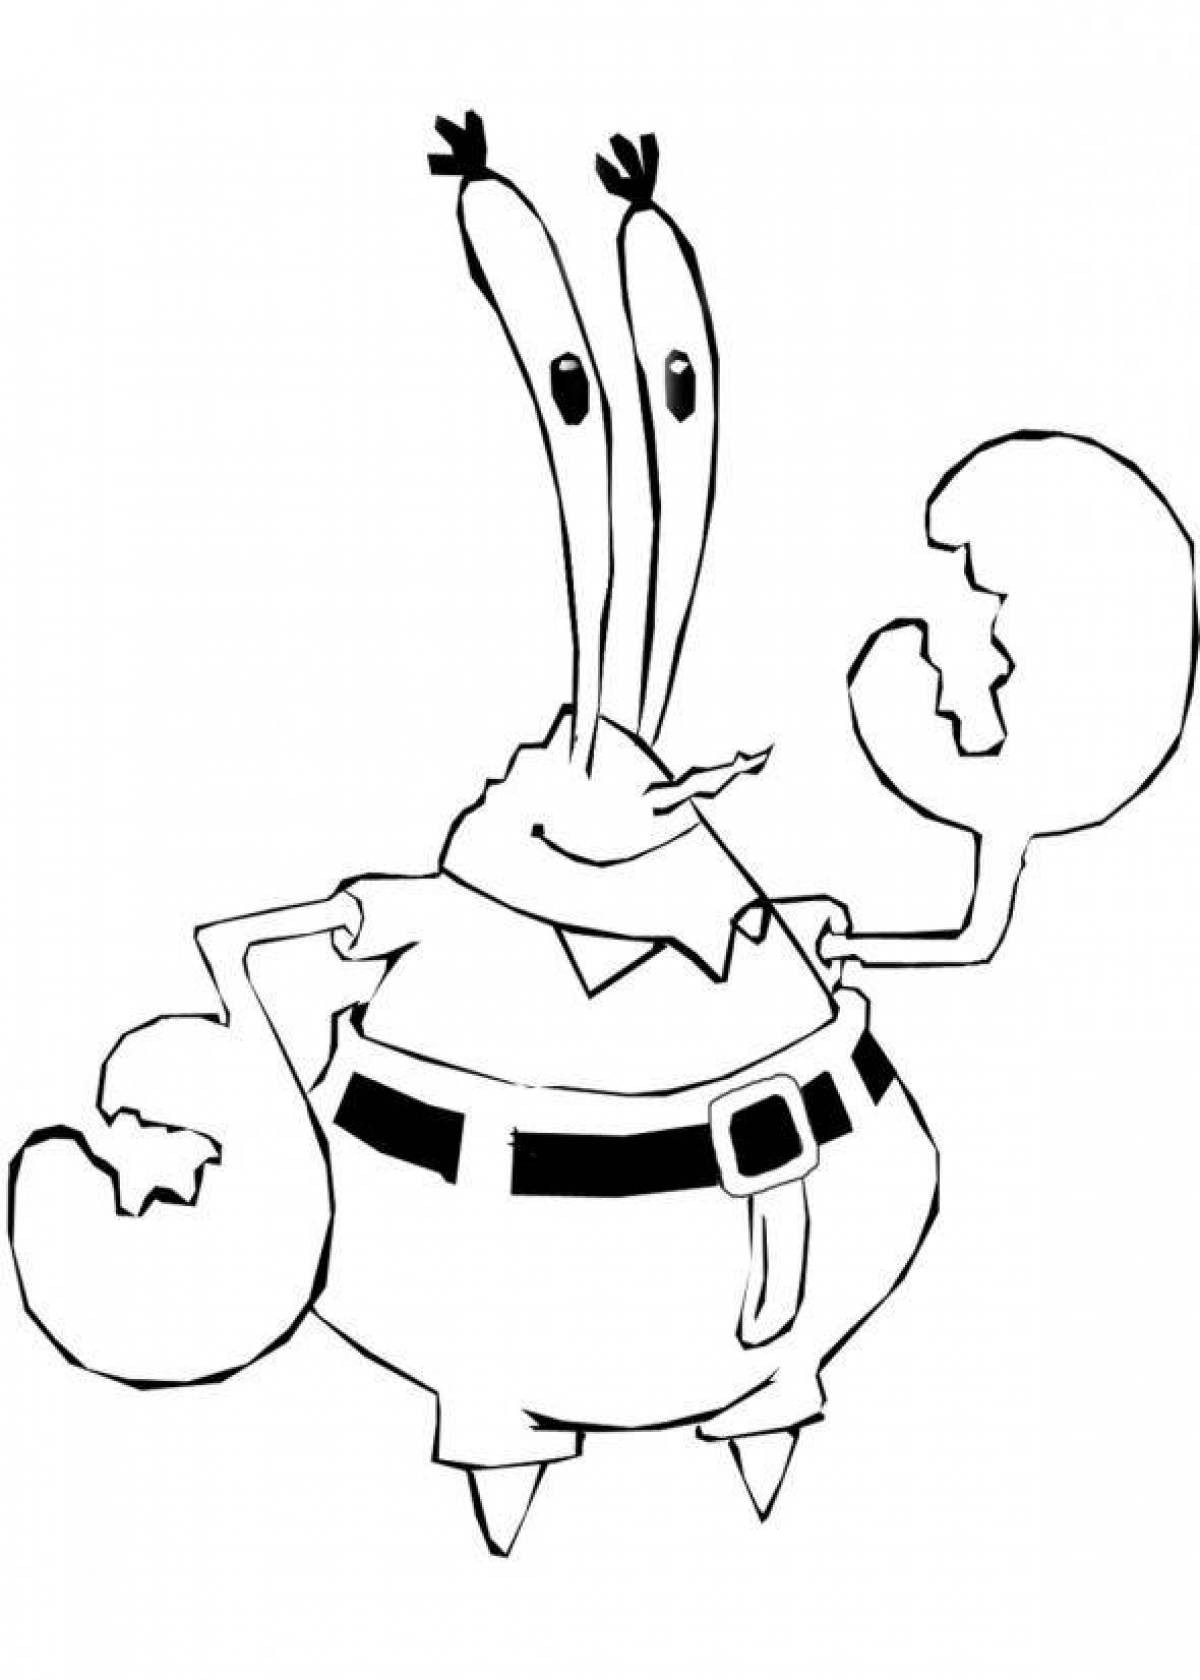 Coloring page shining mr krabs